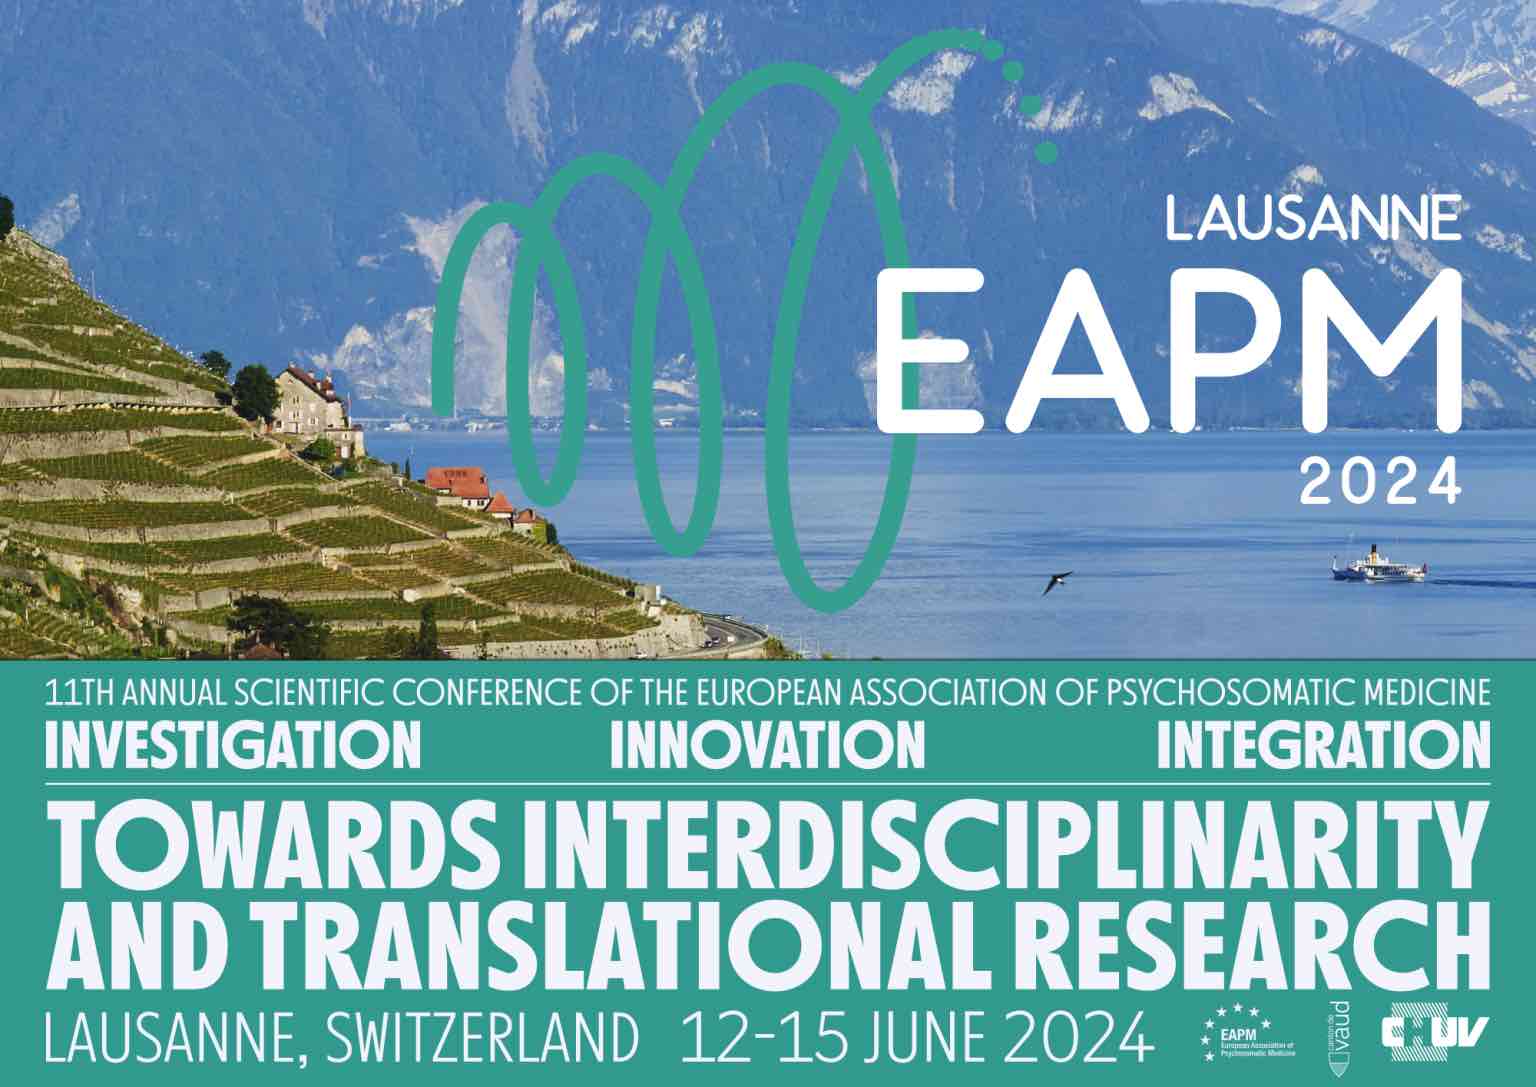 Dr Spencer will be addressing the 11th Annual Scientific Conference of the European Association for Psychosomatic Medicine, which will be held in Lausanne on 12-15 June 2024.